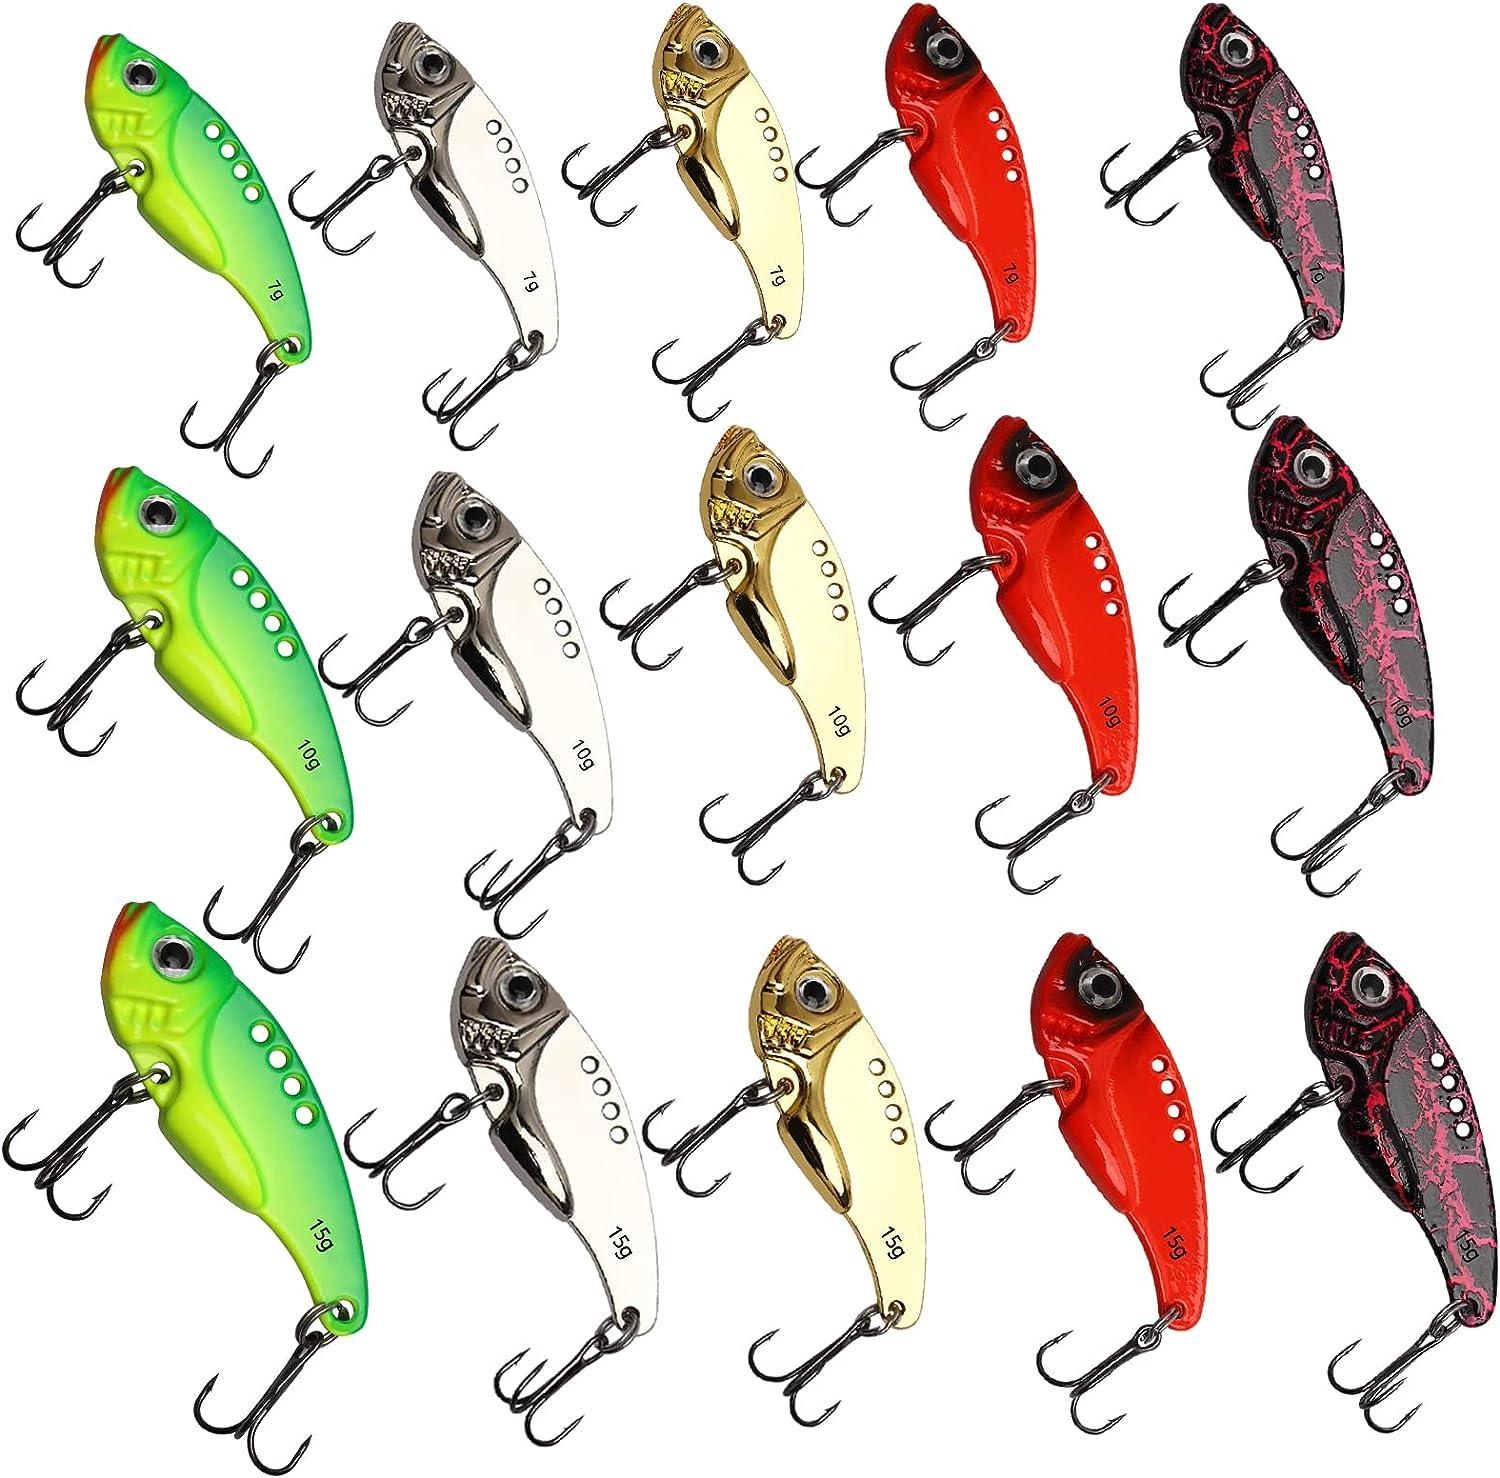 Fishing Spoon Lures Fishing Bait Trout Bass Fishing Lure for Bass